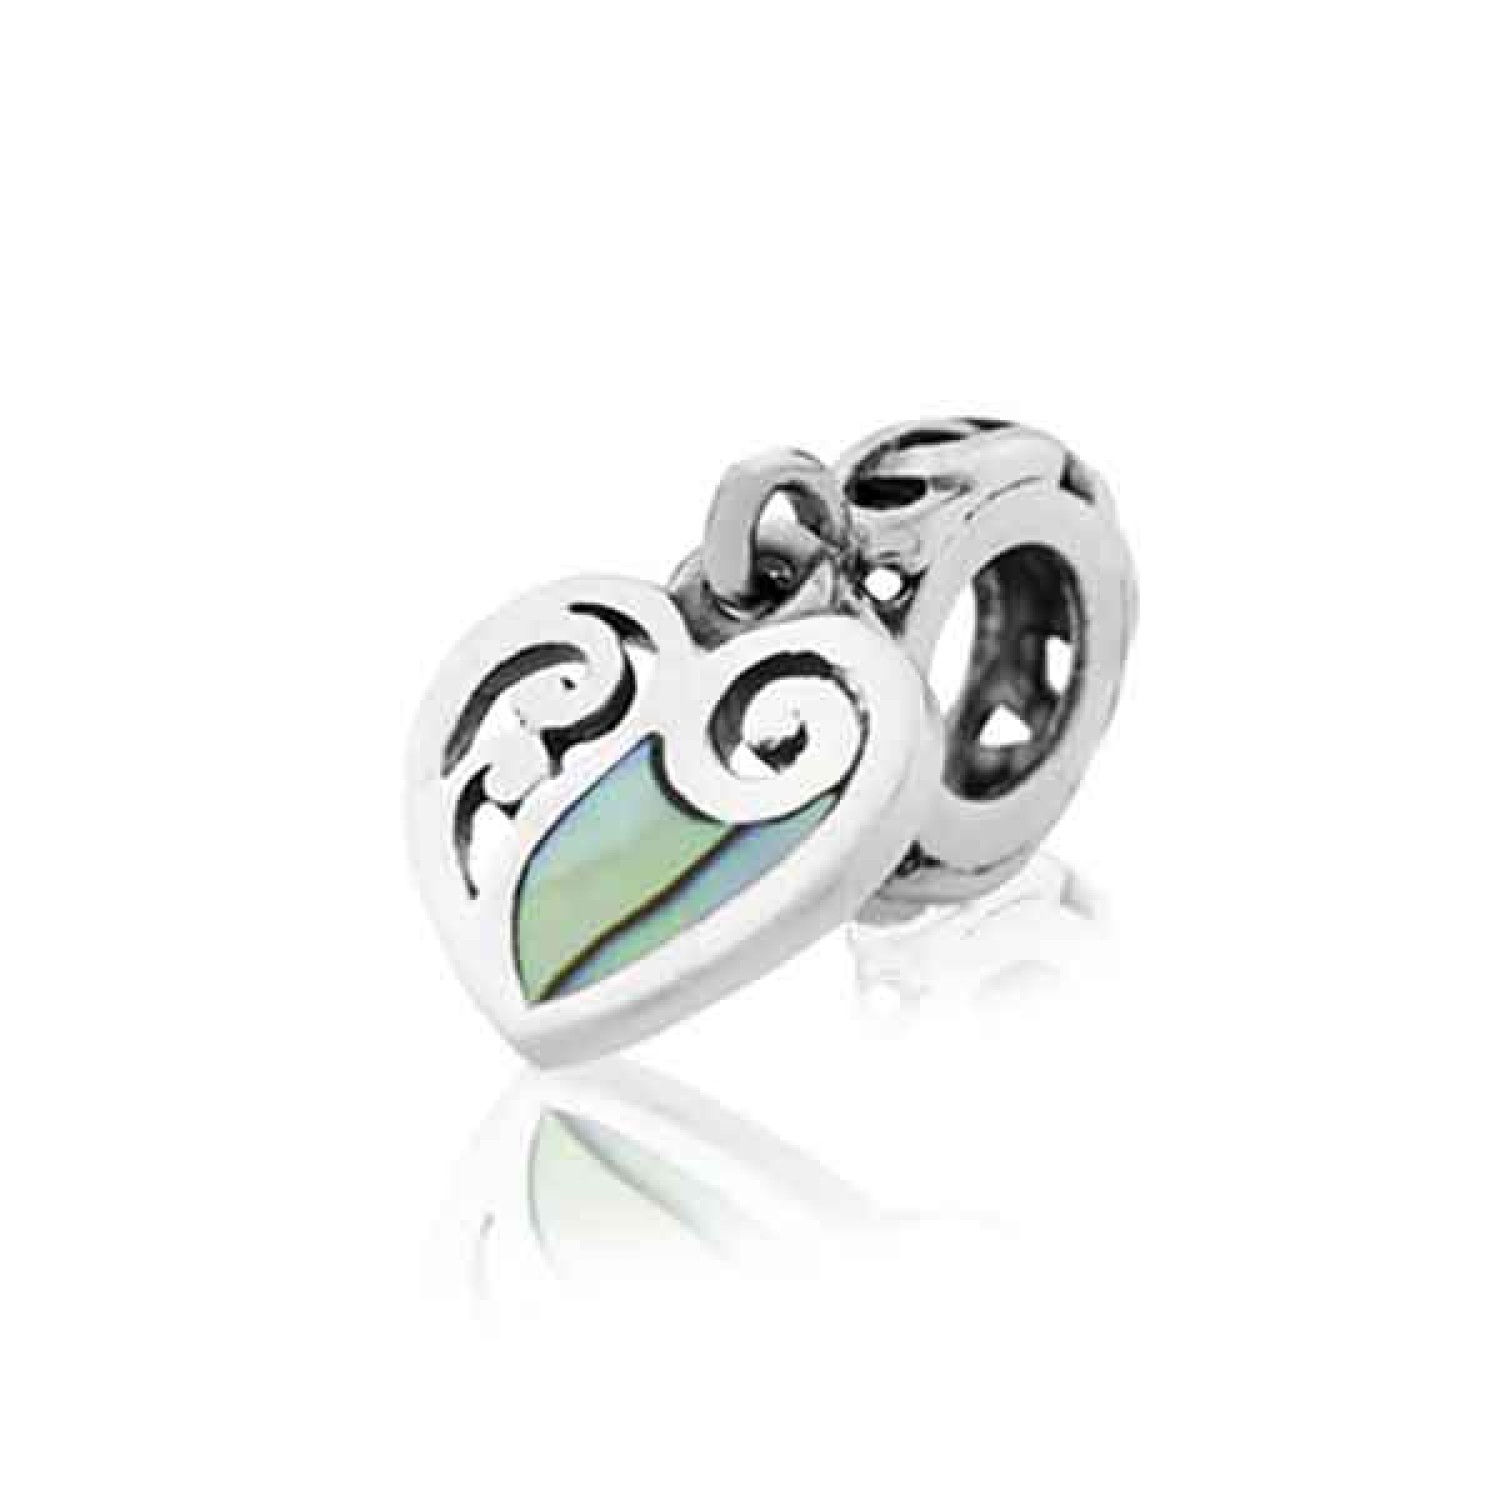 LKP002 Evolve NZ  Charms Paua Heart. Two korus form a heart that symbolises the connection and growth between two people. A smaller koru unfurls between them to represent the beauty or new life that grows from the heart. New Zealand paua is c @christies.o